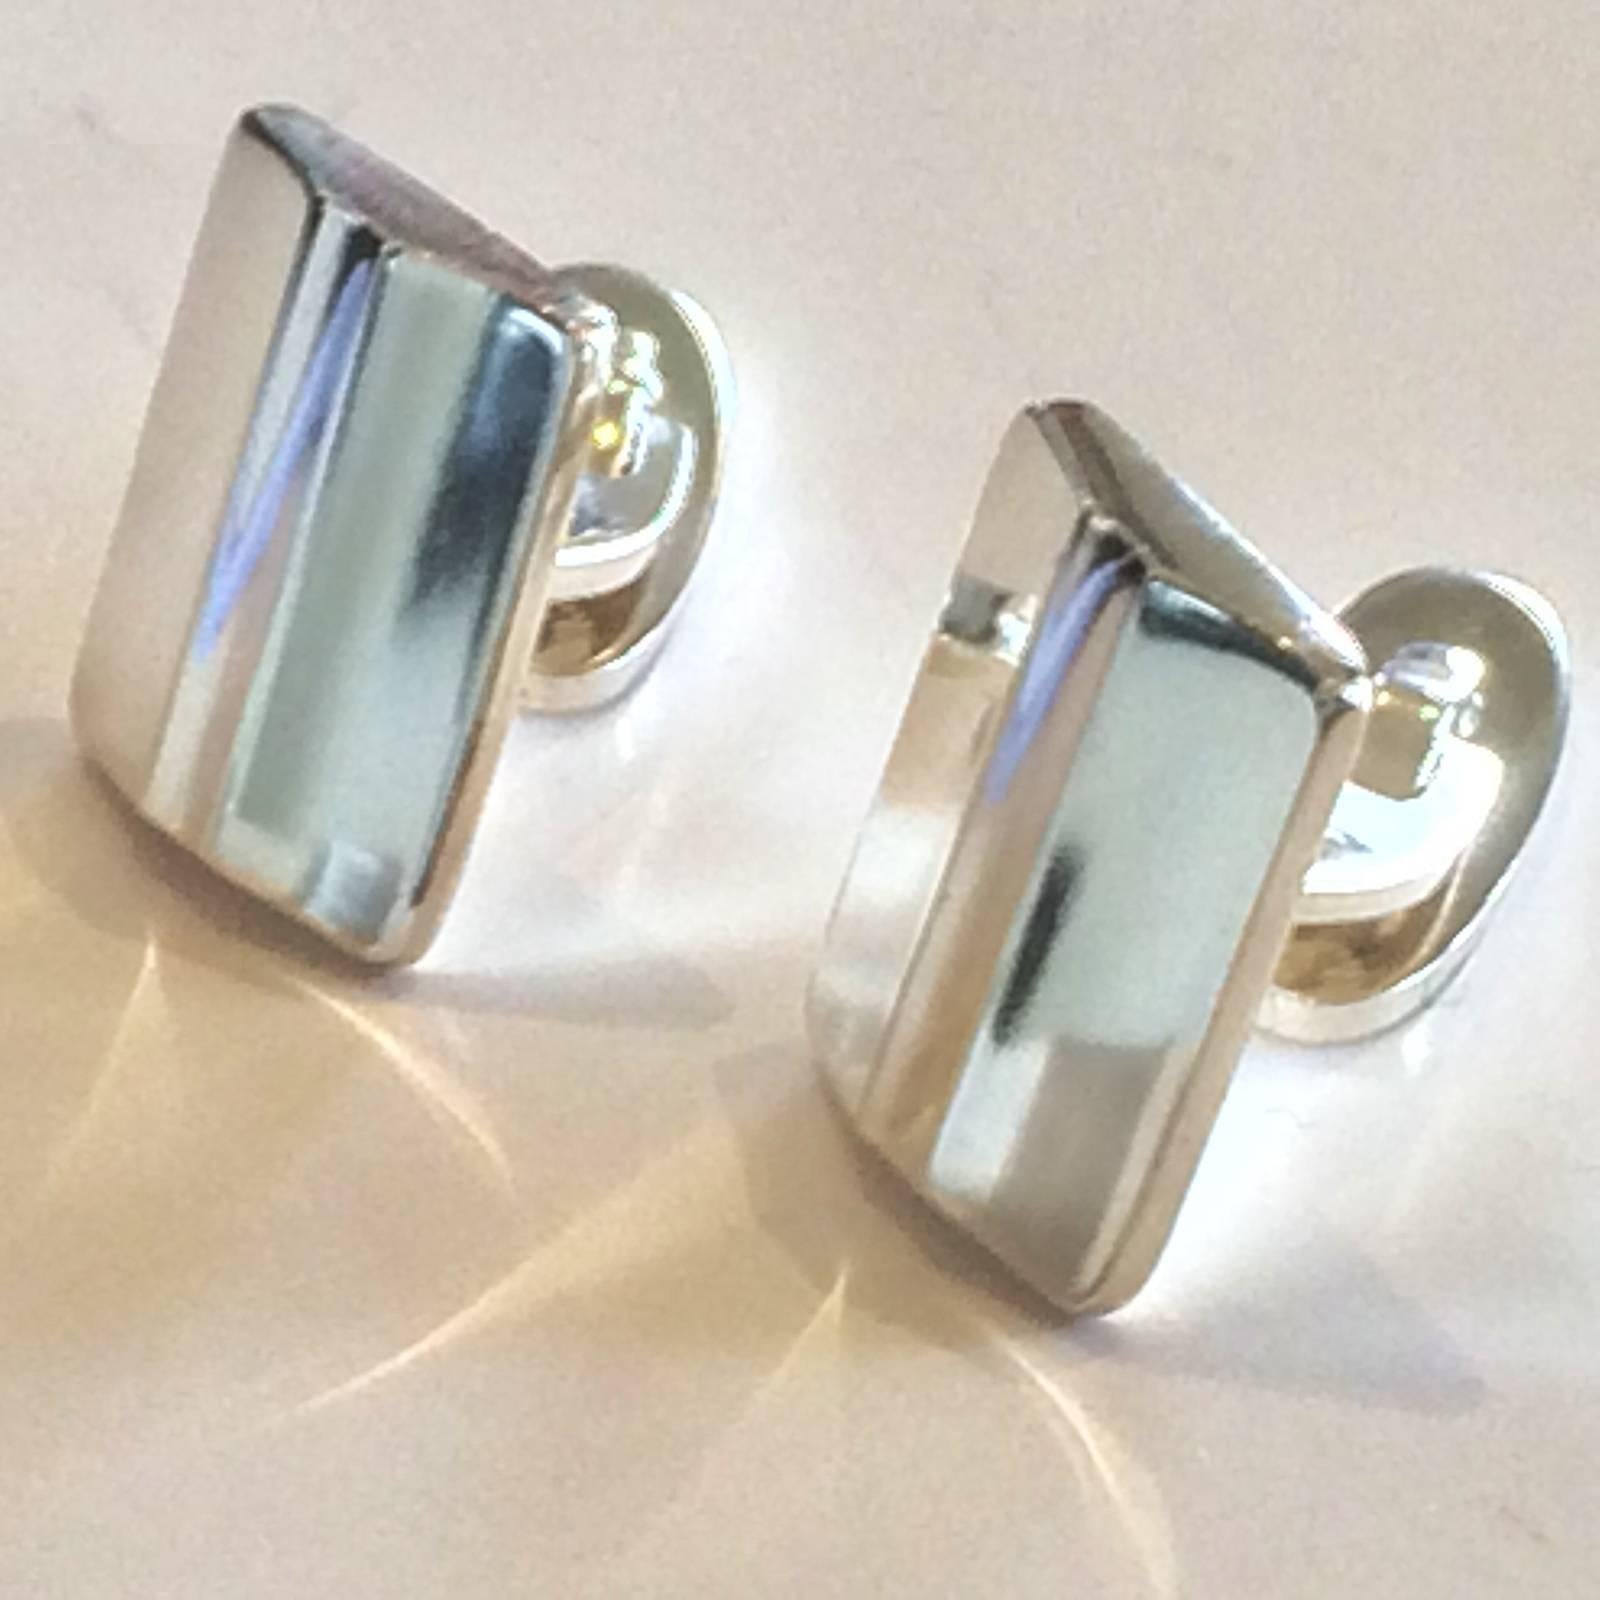 Vintage Georg Jensen Sterling Silver, Pair of Cufflinks, Design No. 125, “Modern”. Totally immaculate condition, with no damage, no scratches, losses or repairs. Post 1945 Hallmarks to rear of each piece, on the sides of the central bar, “925 S”,